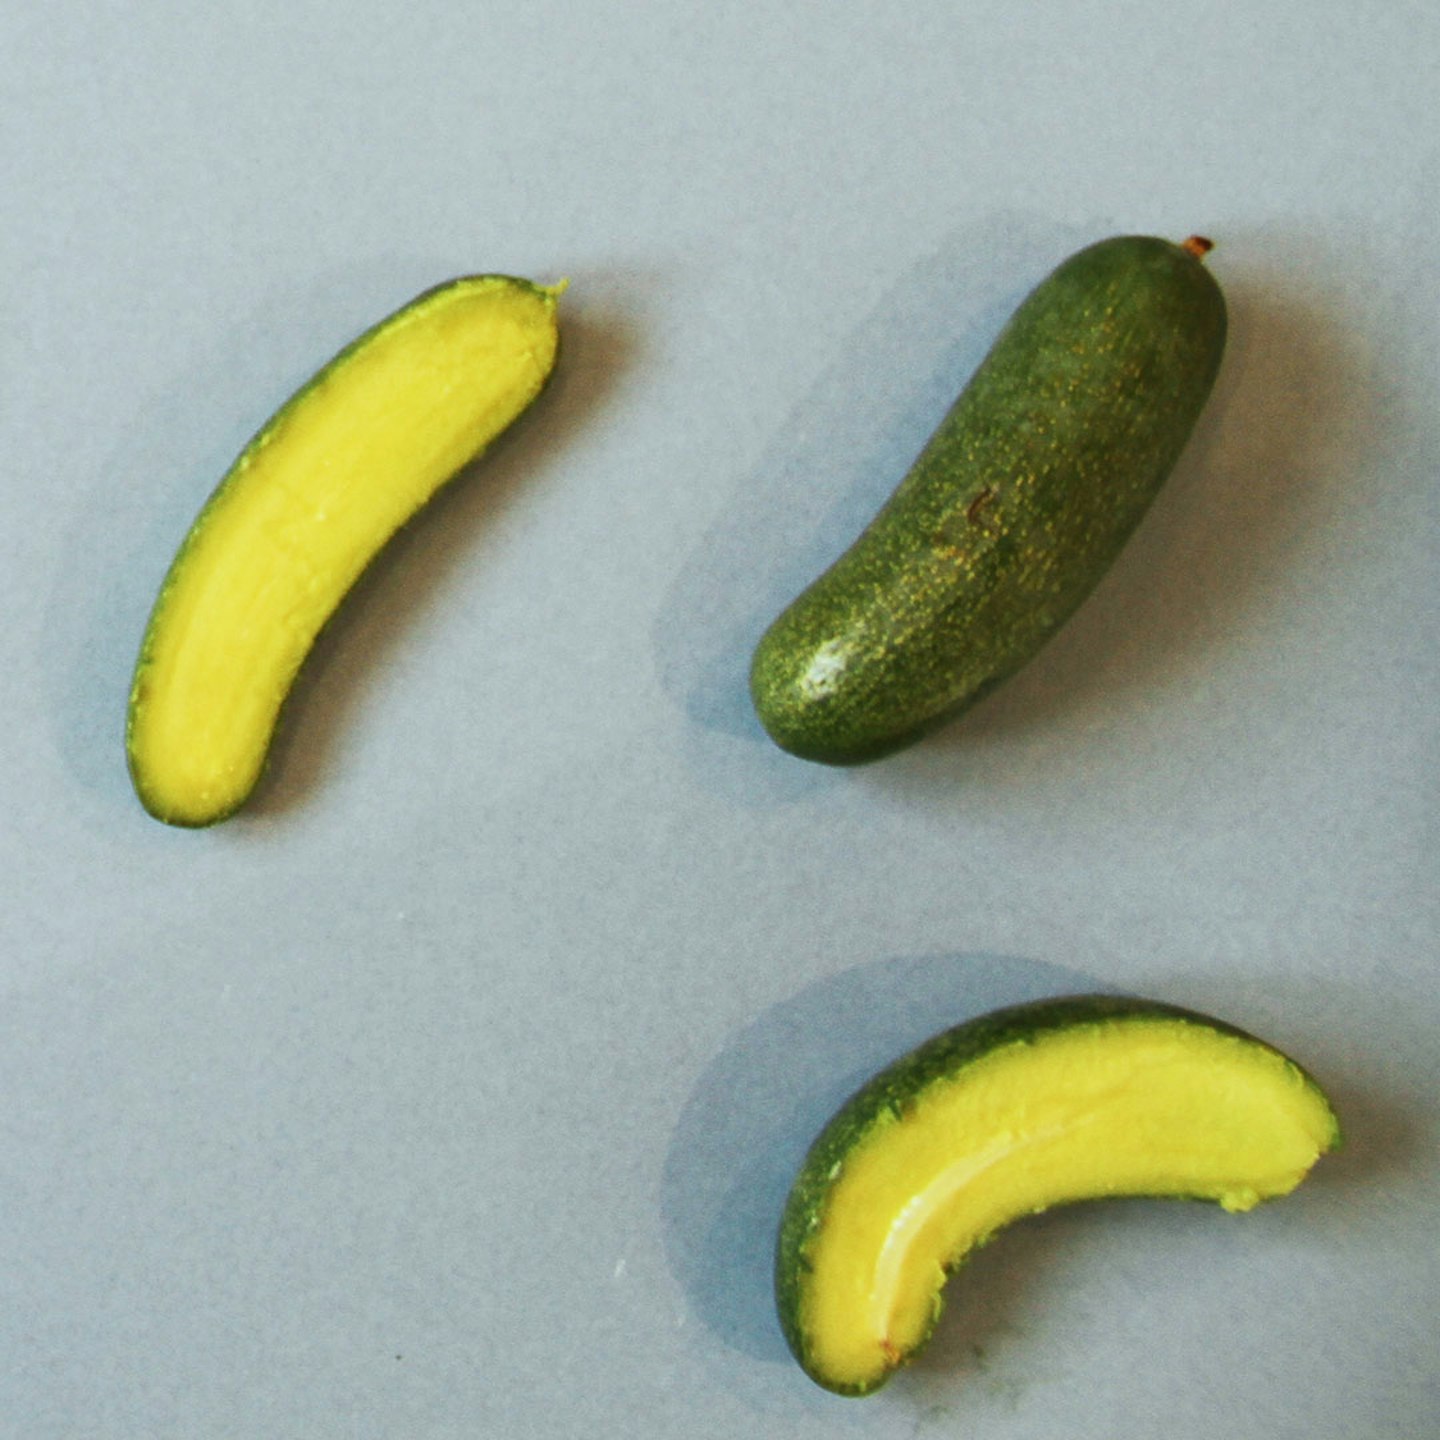 We Tried Small, Stoneless 'Cocktail' Avocados